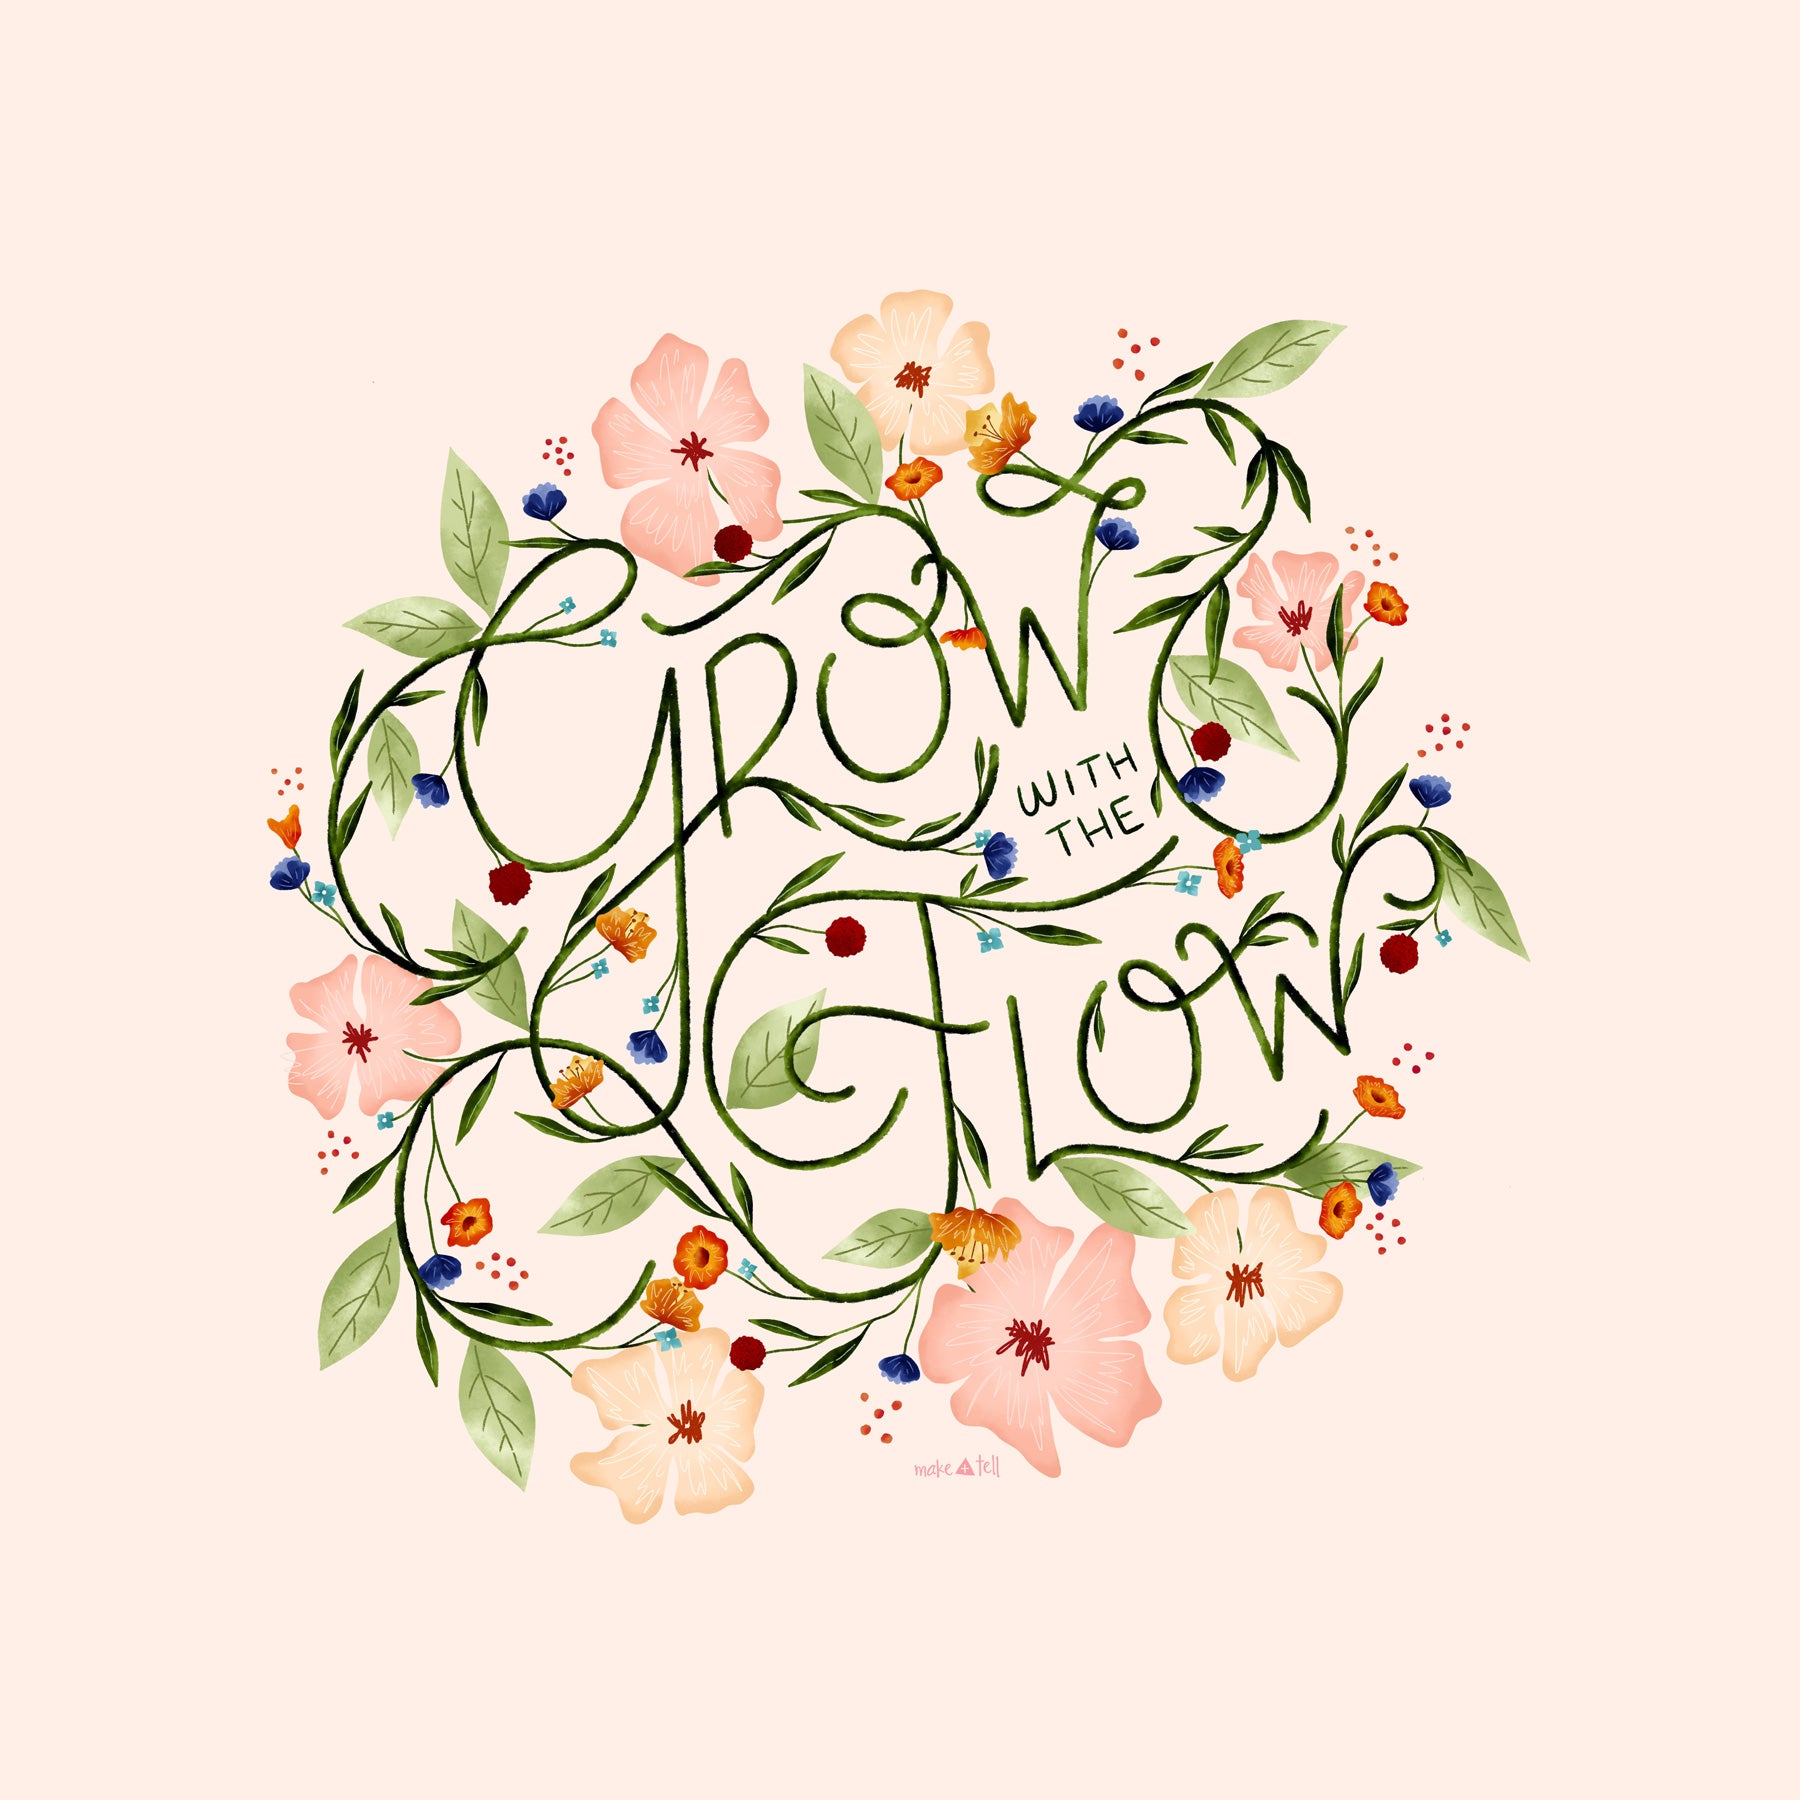 Grow with the flow self-care motivational floral hand-lettered desktop, phone and tablet wallpaper